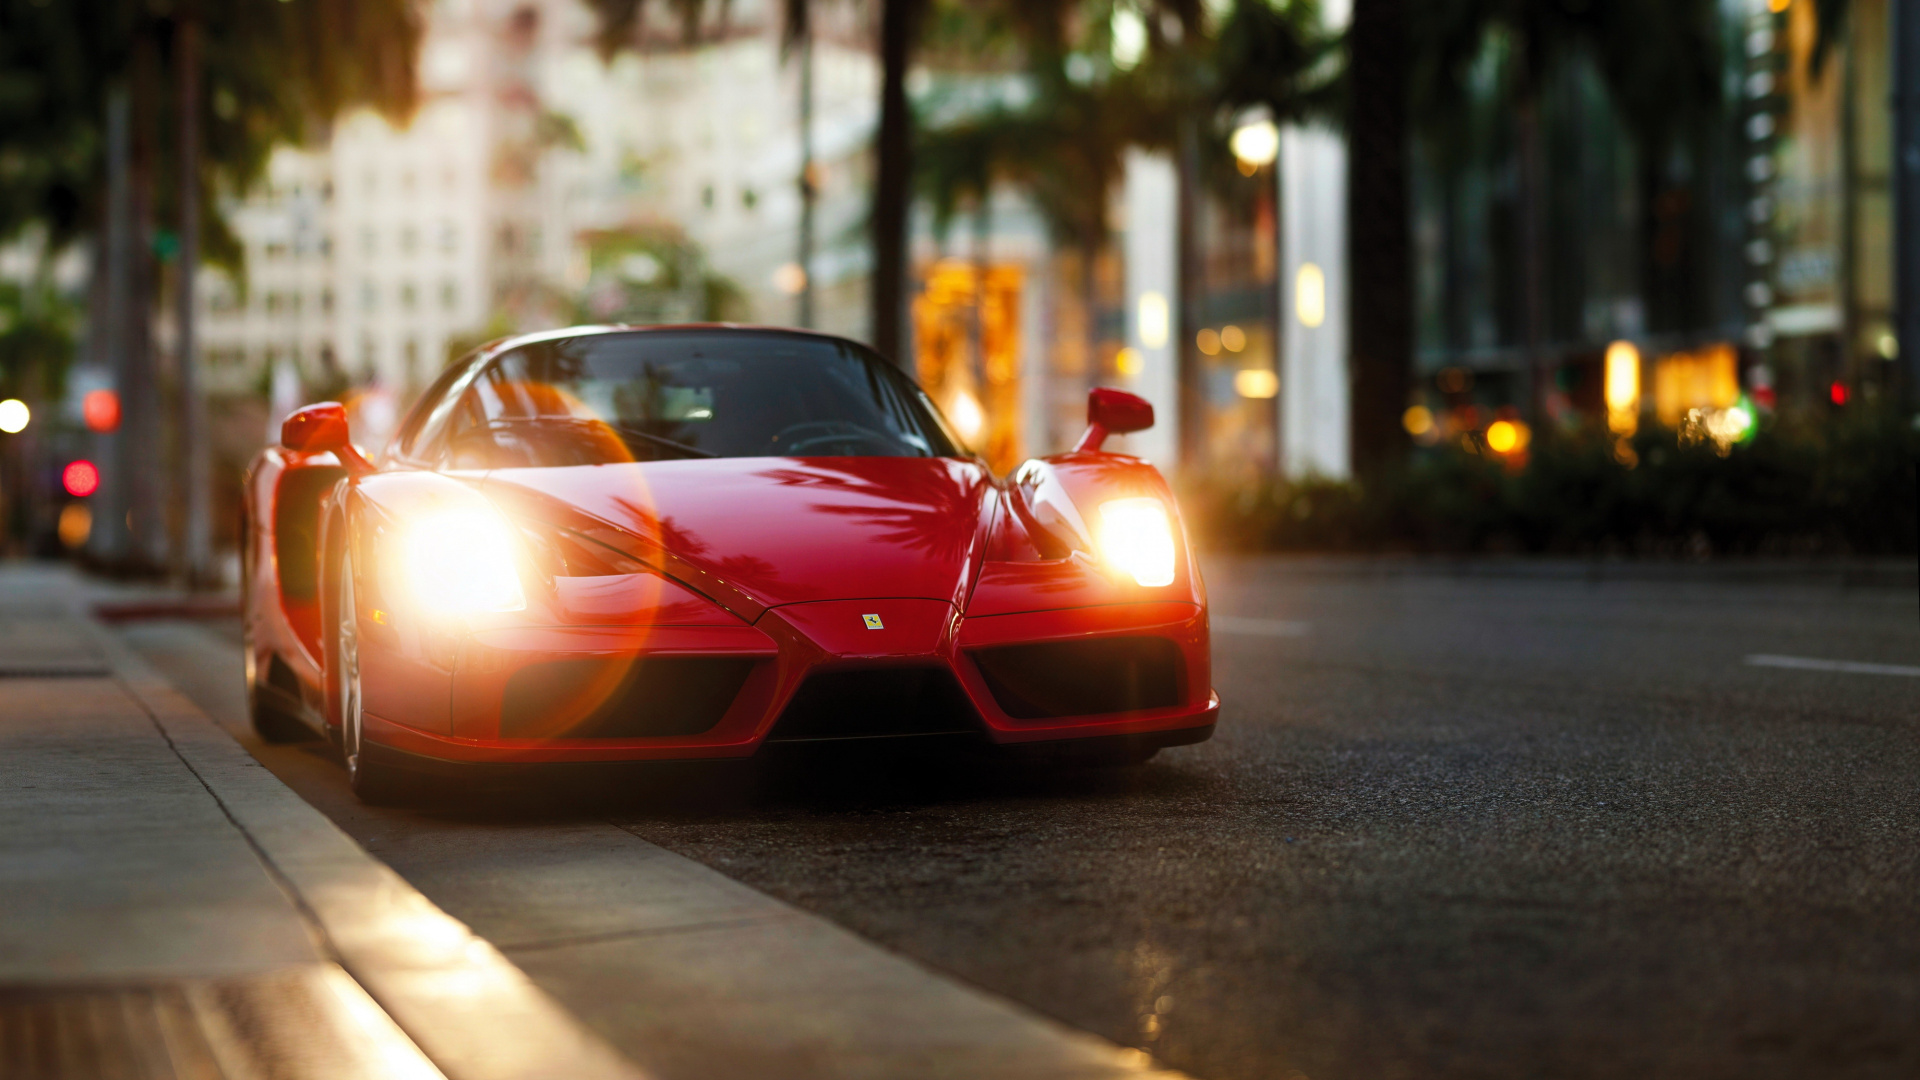 Red Ferrari Sports Car on Road During Daytime. Wallpaper in 1920x1080 Resolution